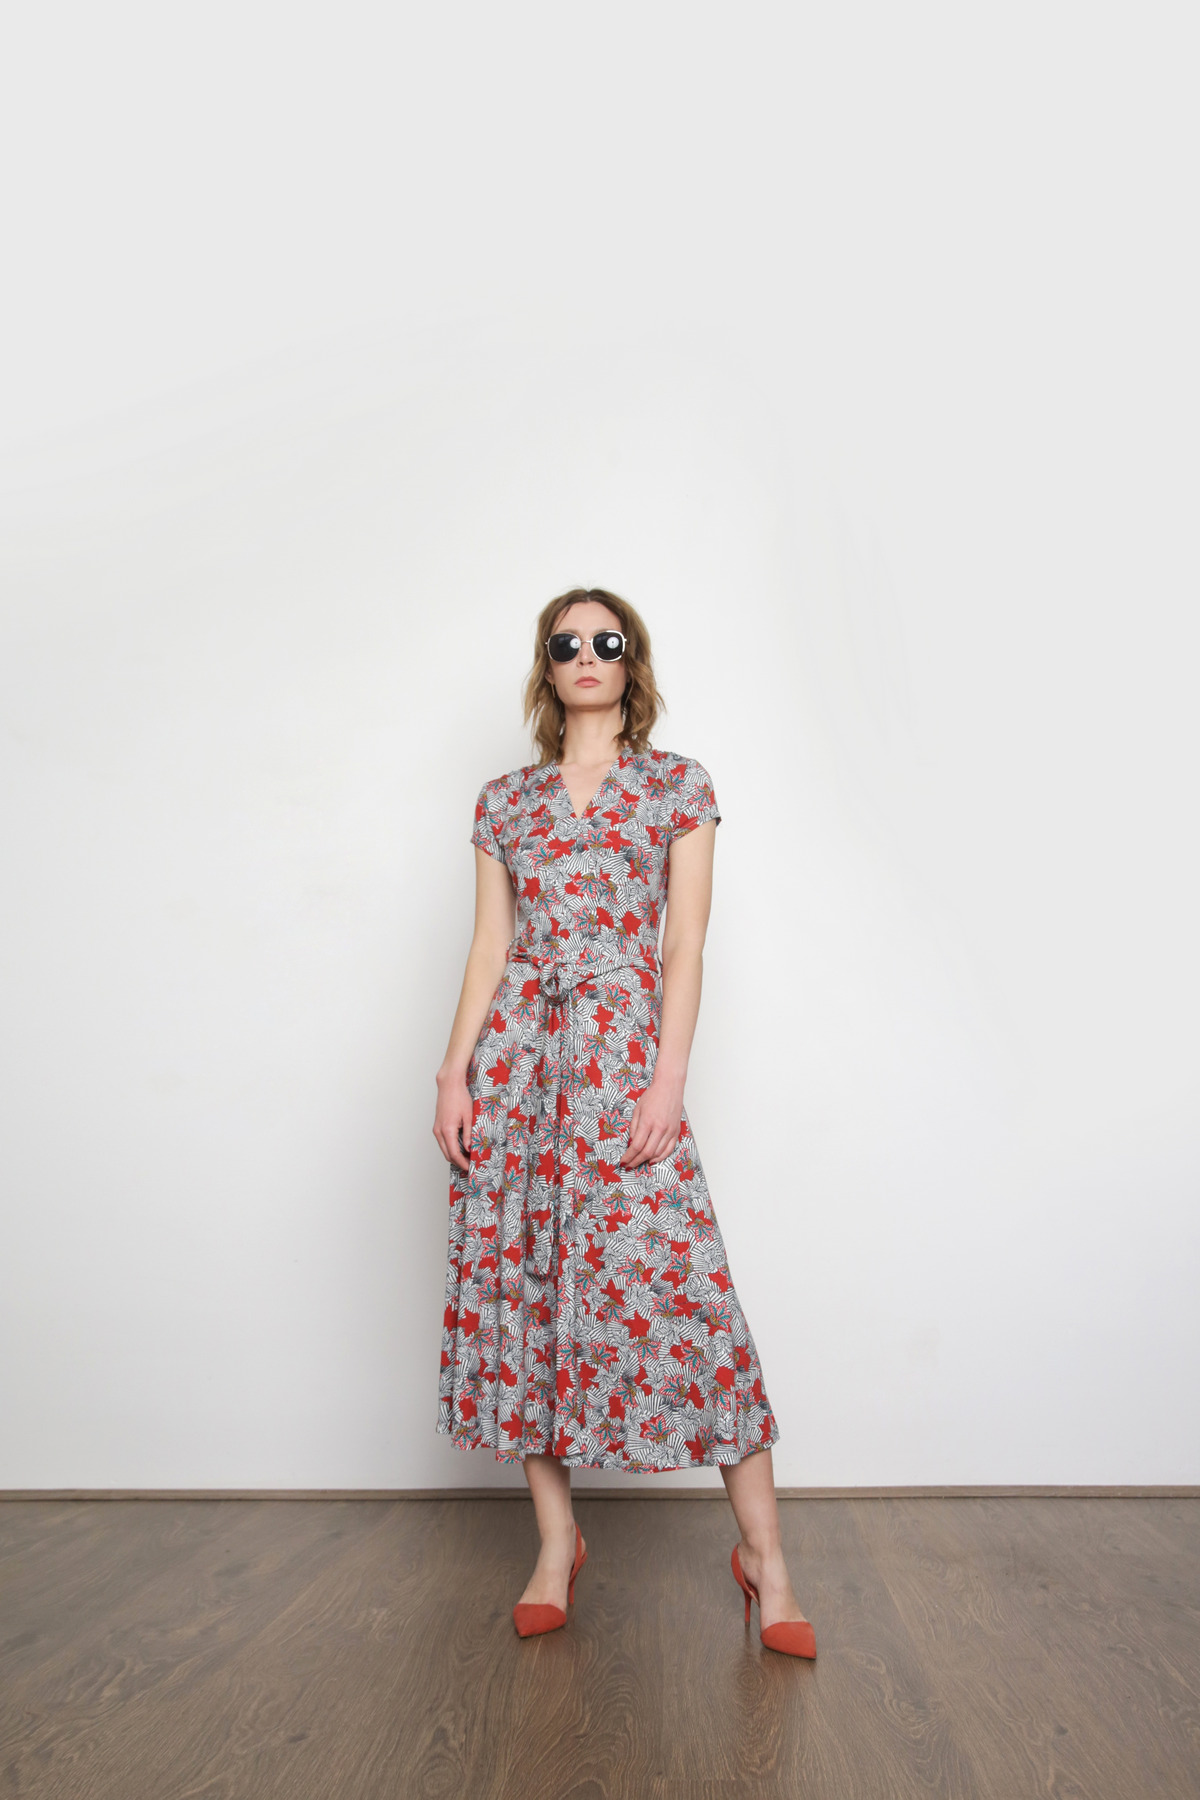 Studio shot of a woman in a floral summer dress.